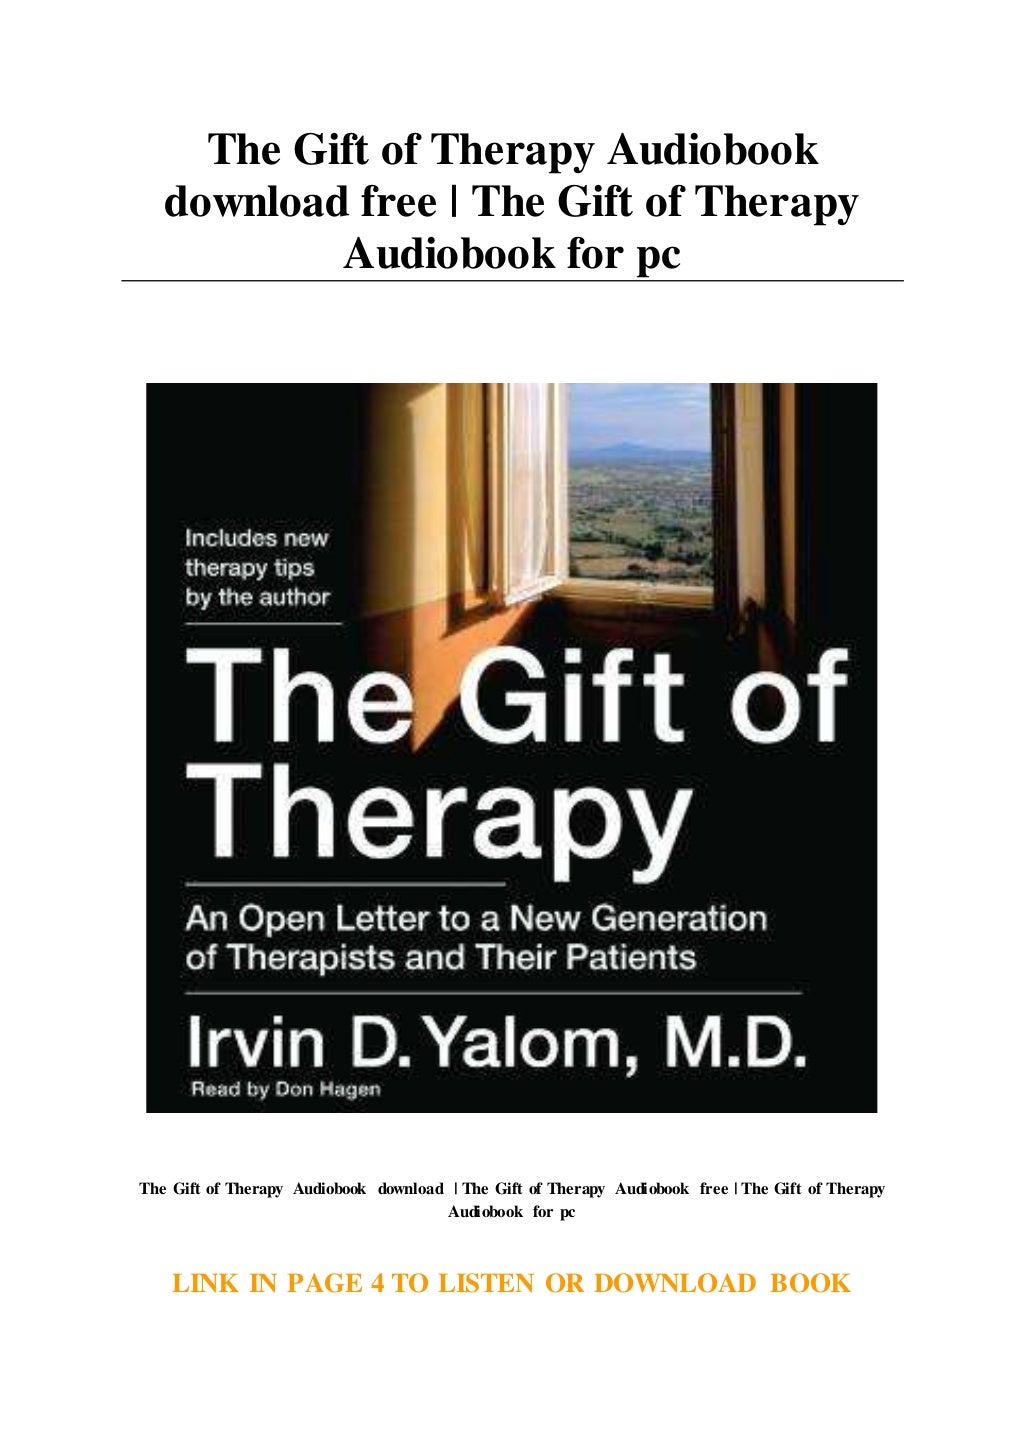 The Gift of Therapy Audiobook download free The Gift of